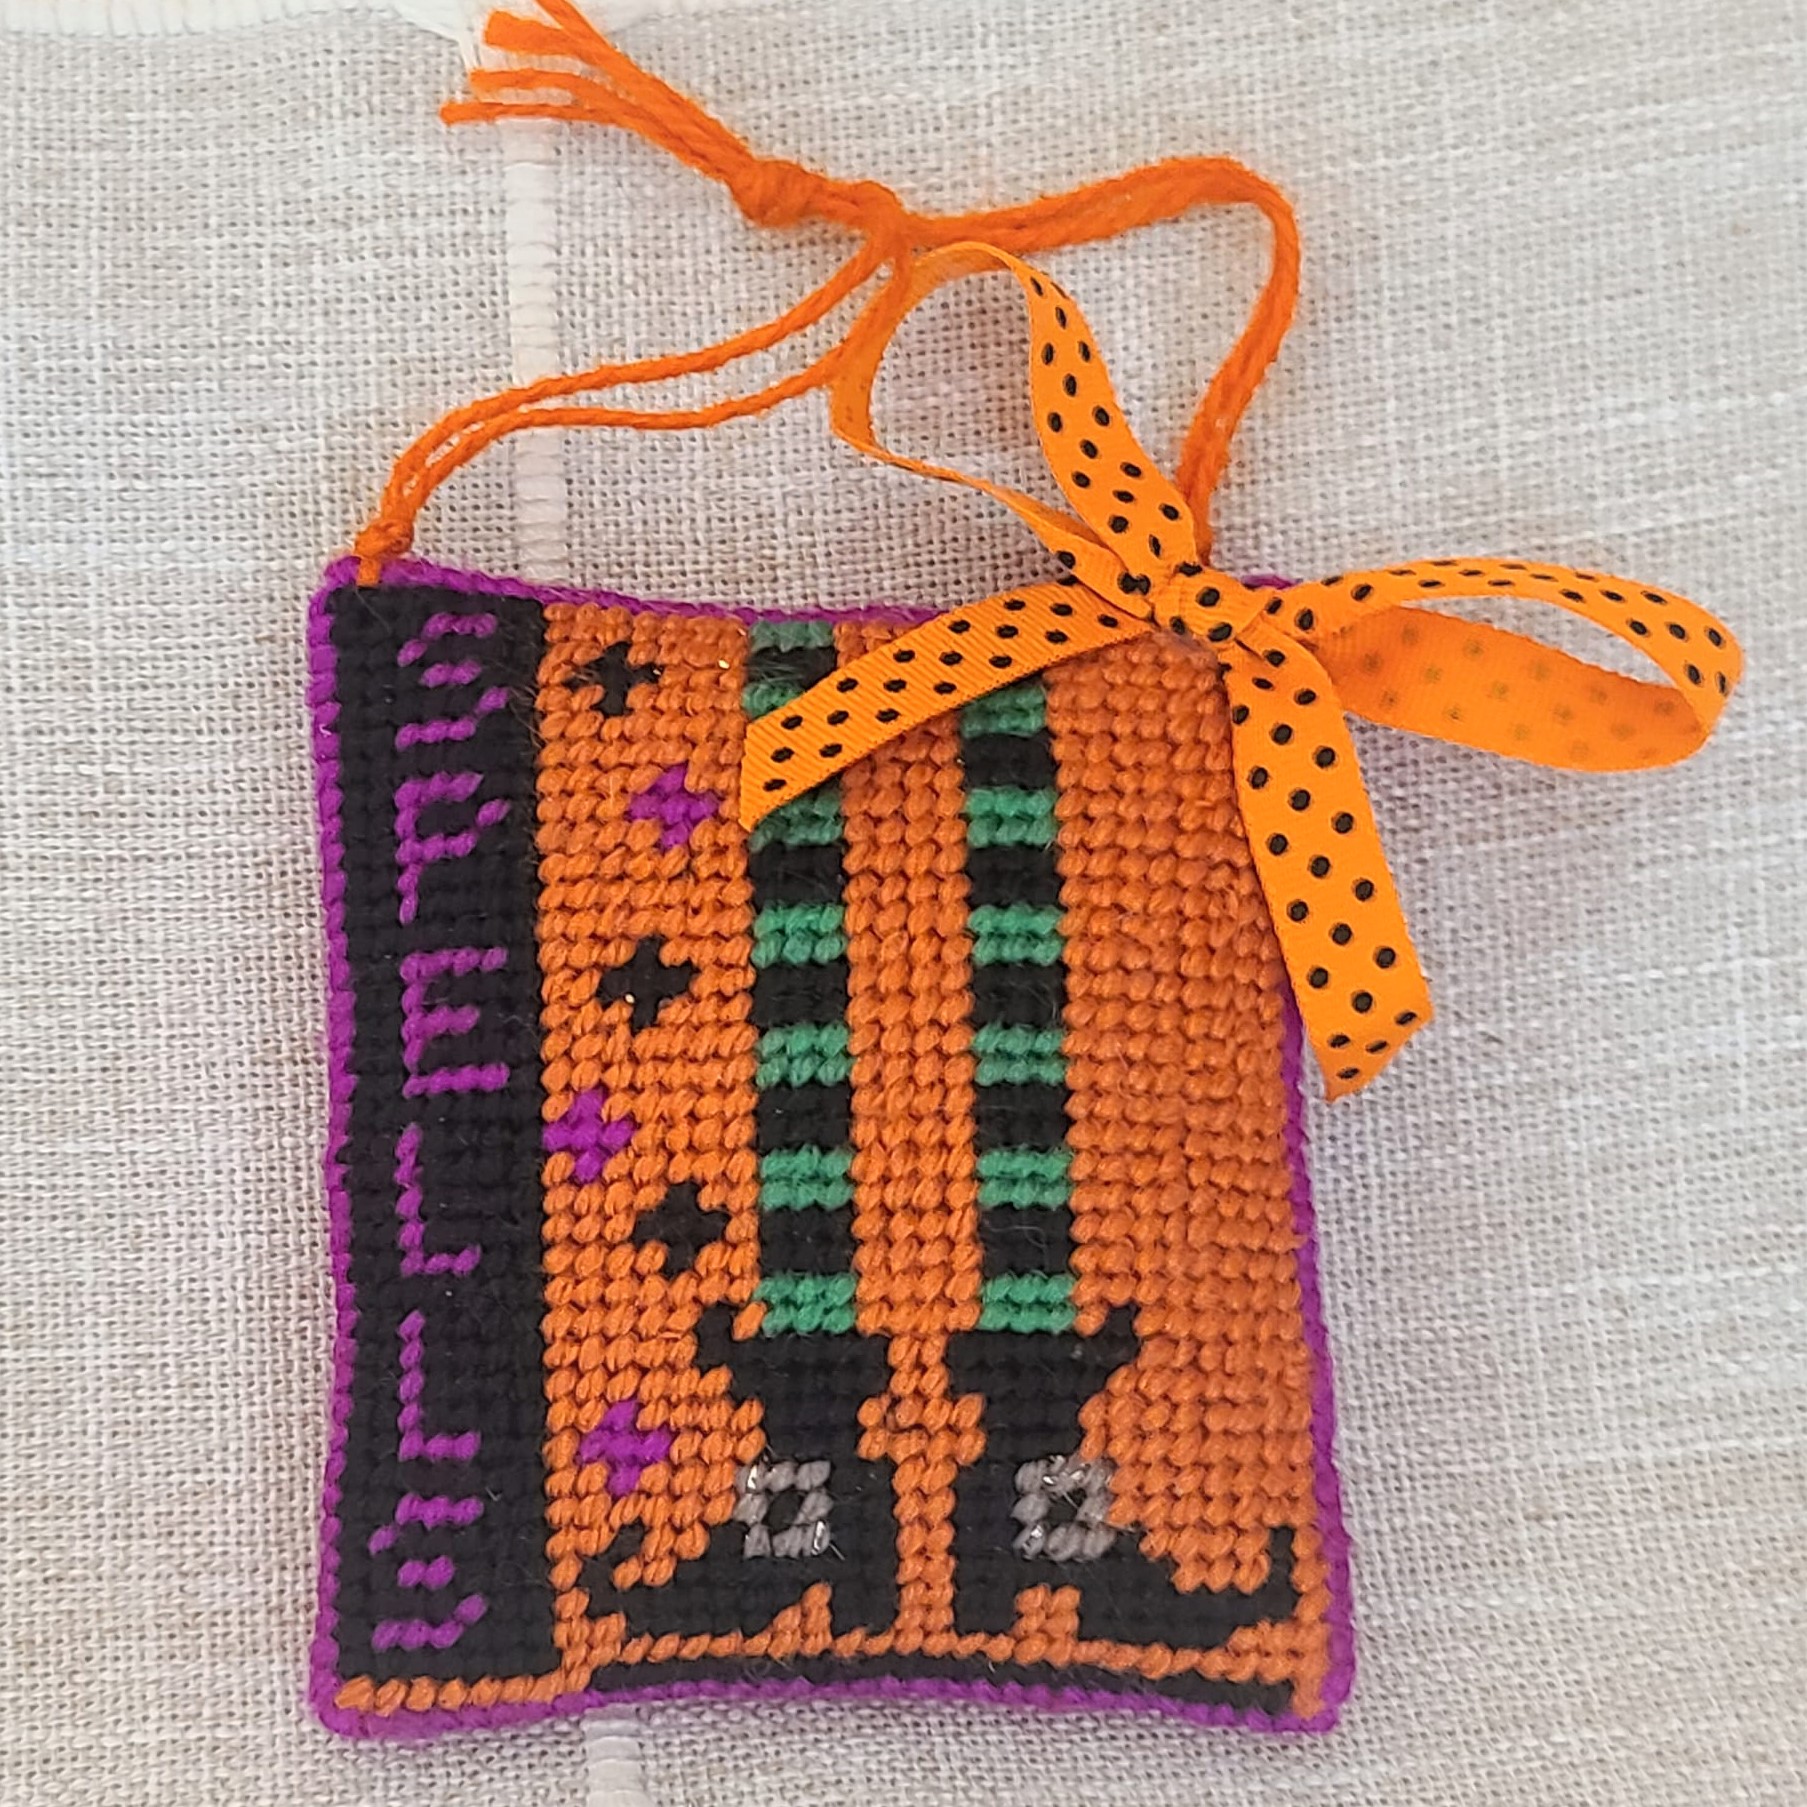 Halloween finished needlepoint SPELLS witch legs ornament - Click Image to Close